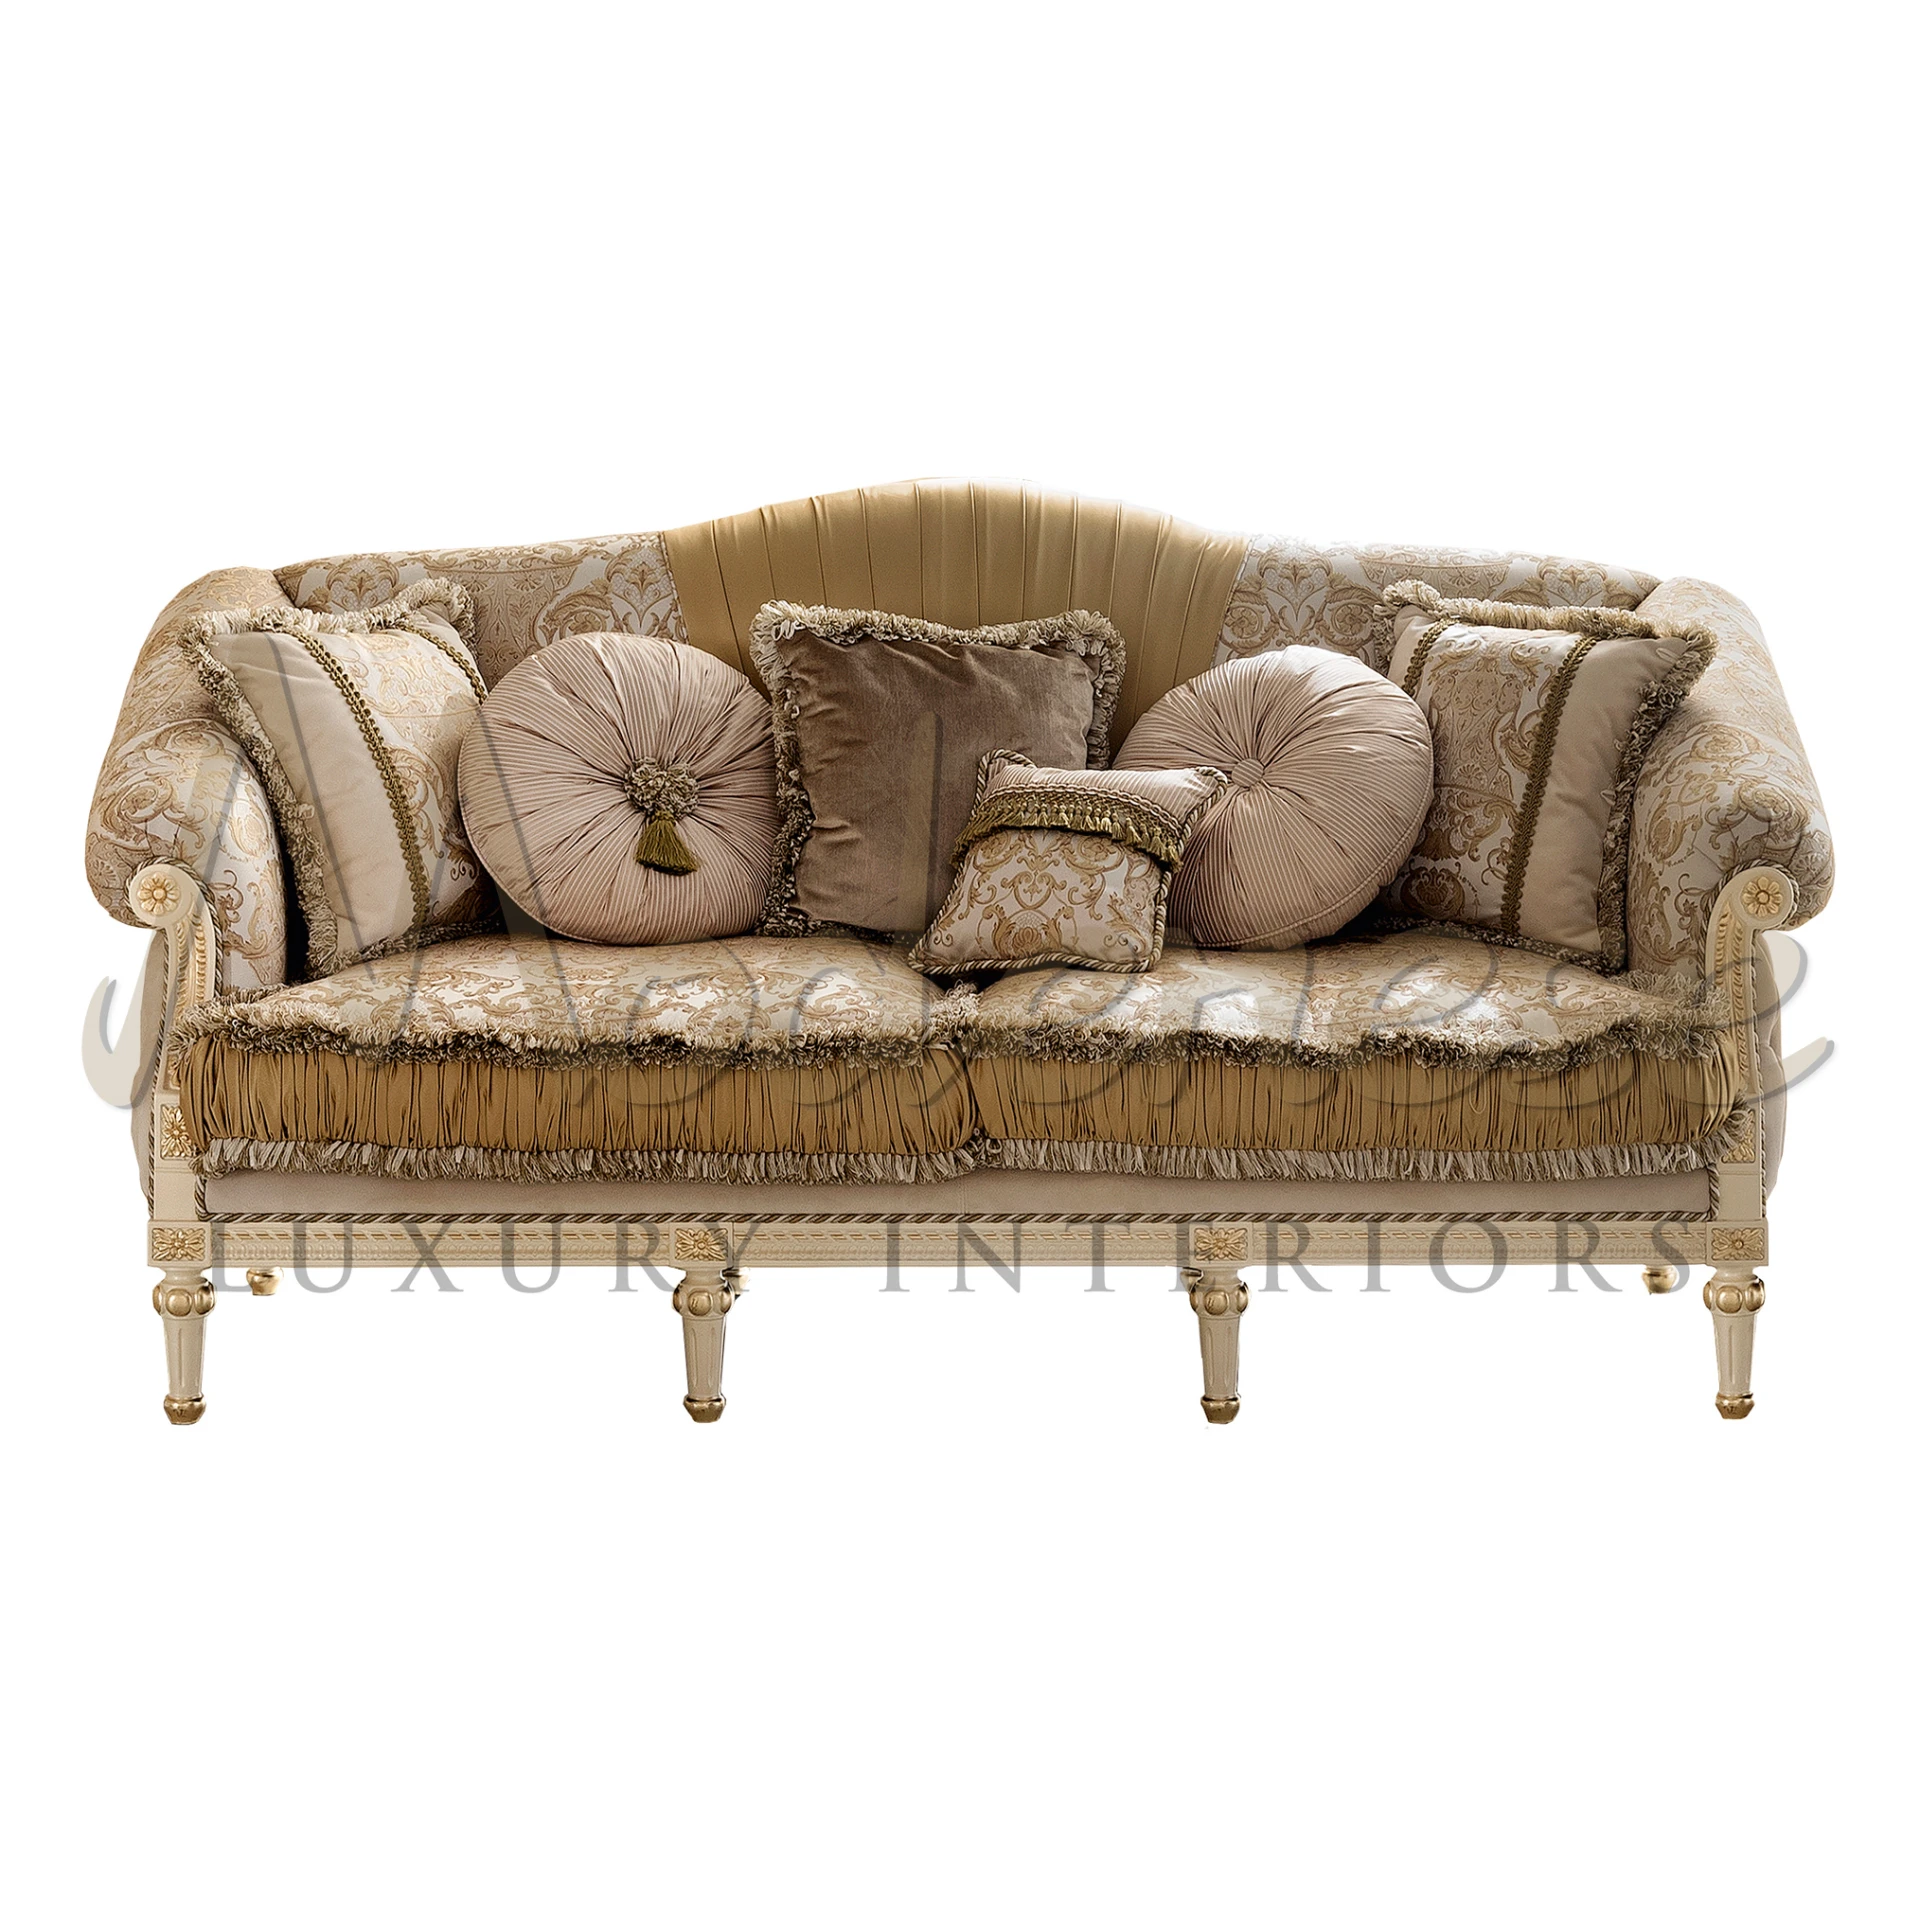 Step into the opulent world of Versailles with our Versailles Style Upholstered Sofa.